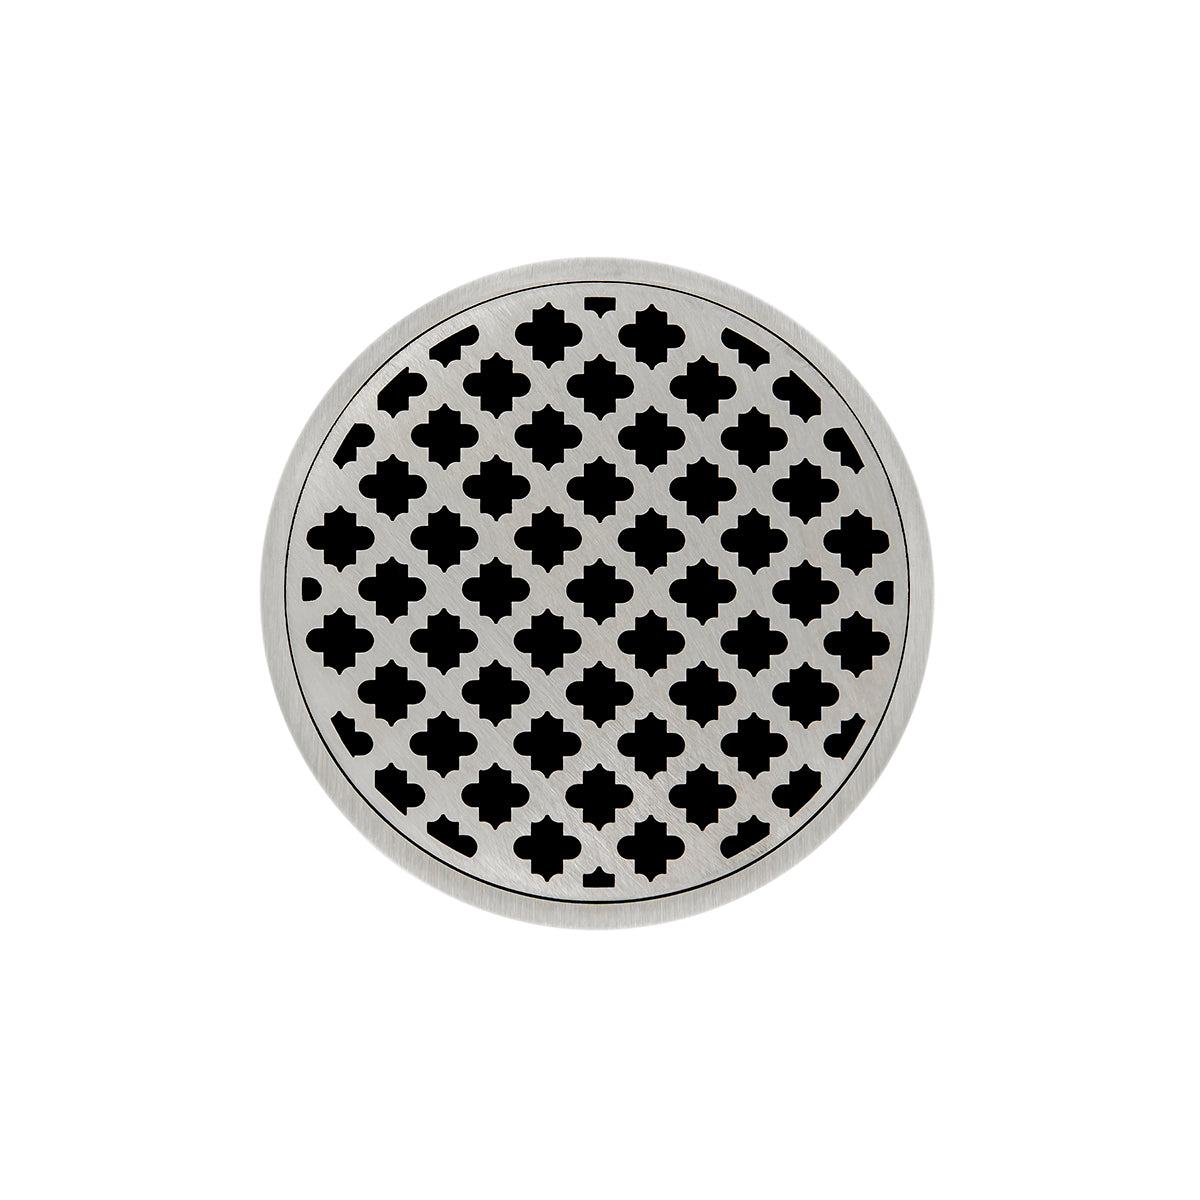 Infinity Drain 5" Round RMD 5 High Flow Premium Center Drain Kit with Moor Pattern Decorative Plate with ABS Drain Body, 3" Outlet